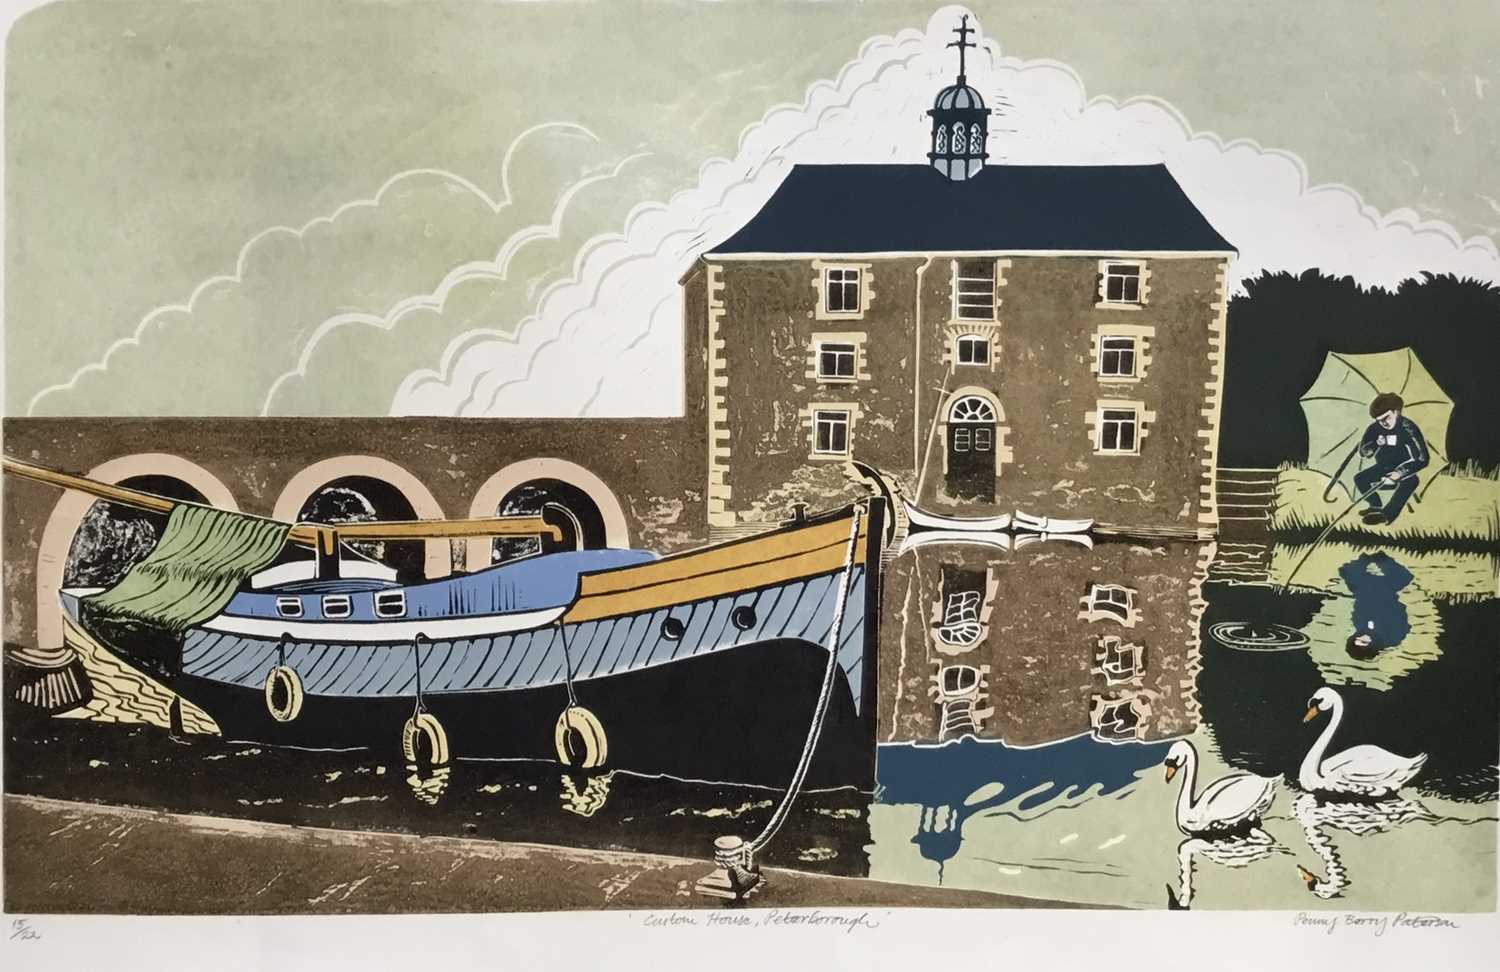 Lot 119 - Penny Berry Paterson (1941-2021) colour linocut- Custom House, Peterborough, image 47 x 75cm, signed titled and numbered 15/22